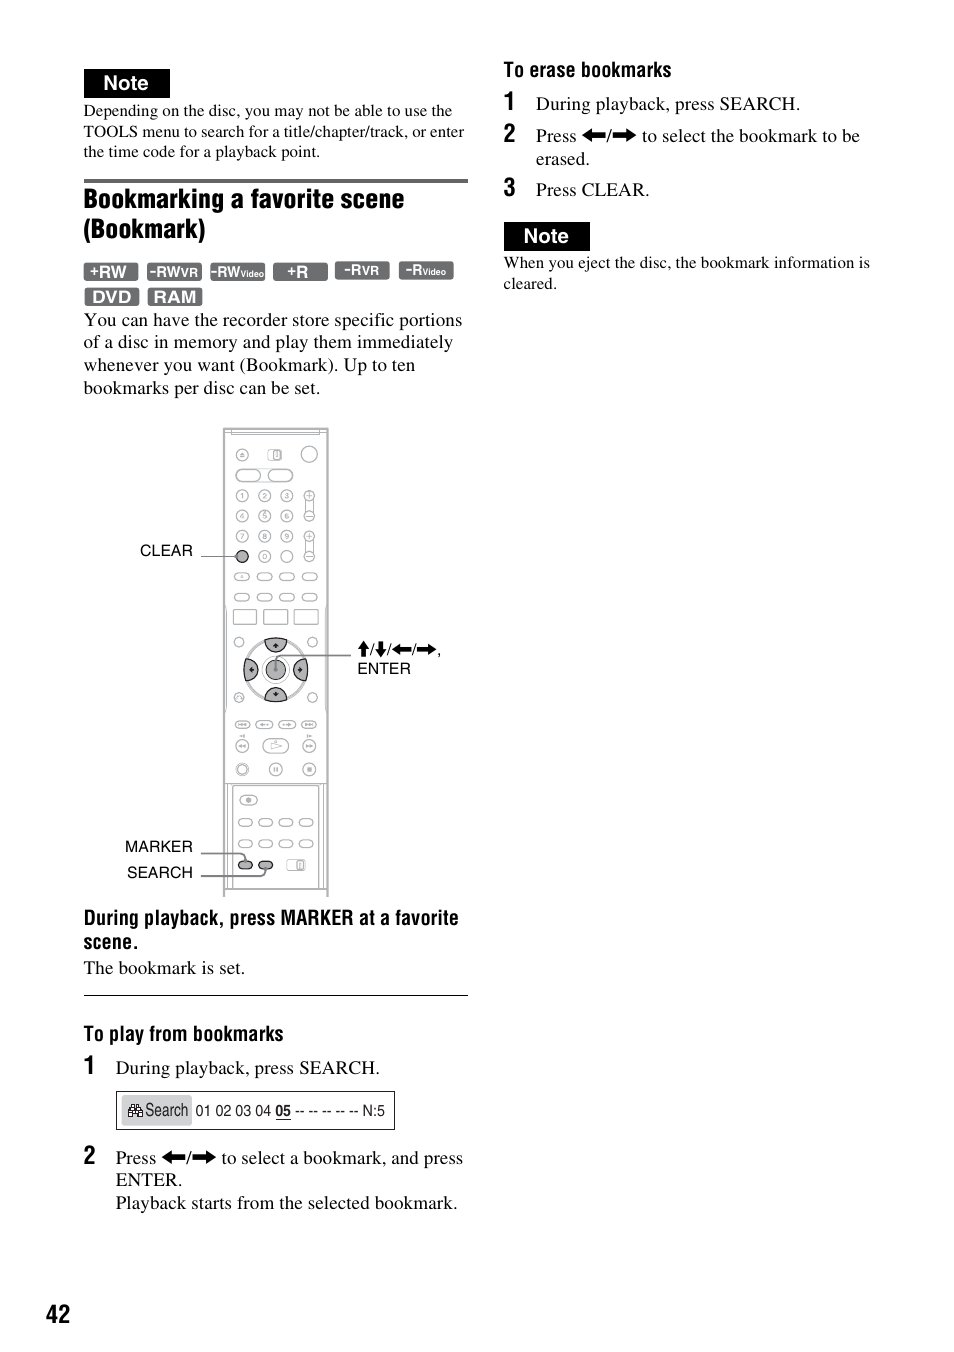 Bookmarking a favorite scene (bookmark) | Sony RDR-VX521 User Manual | Page 42 / 132